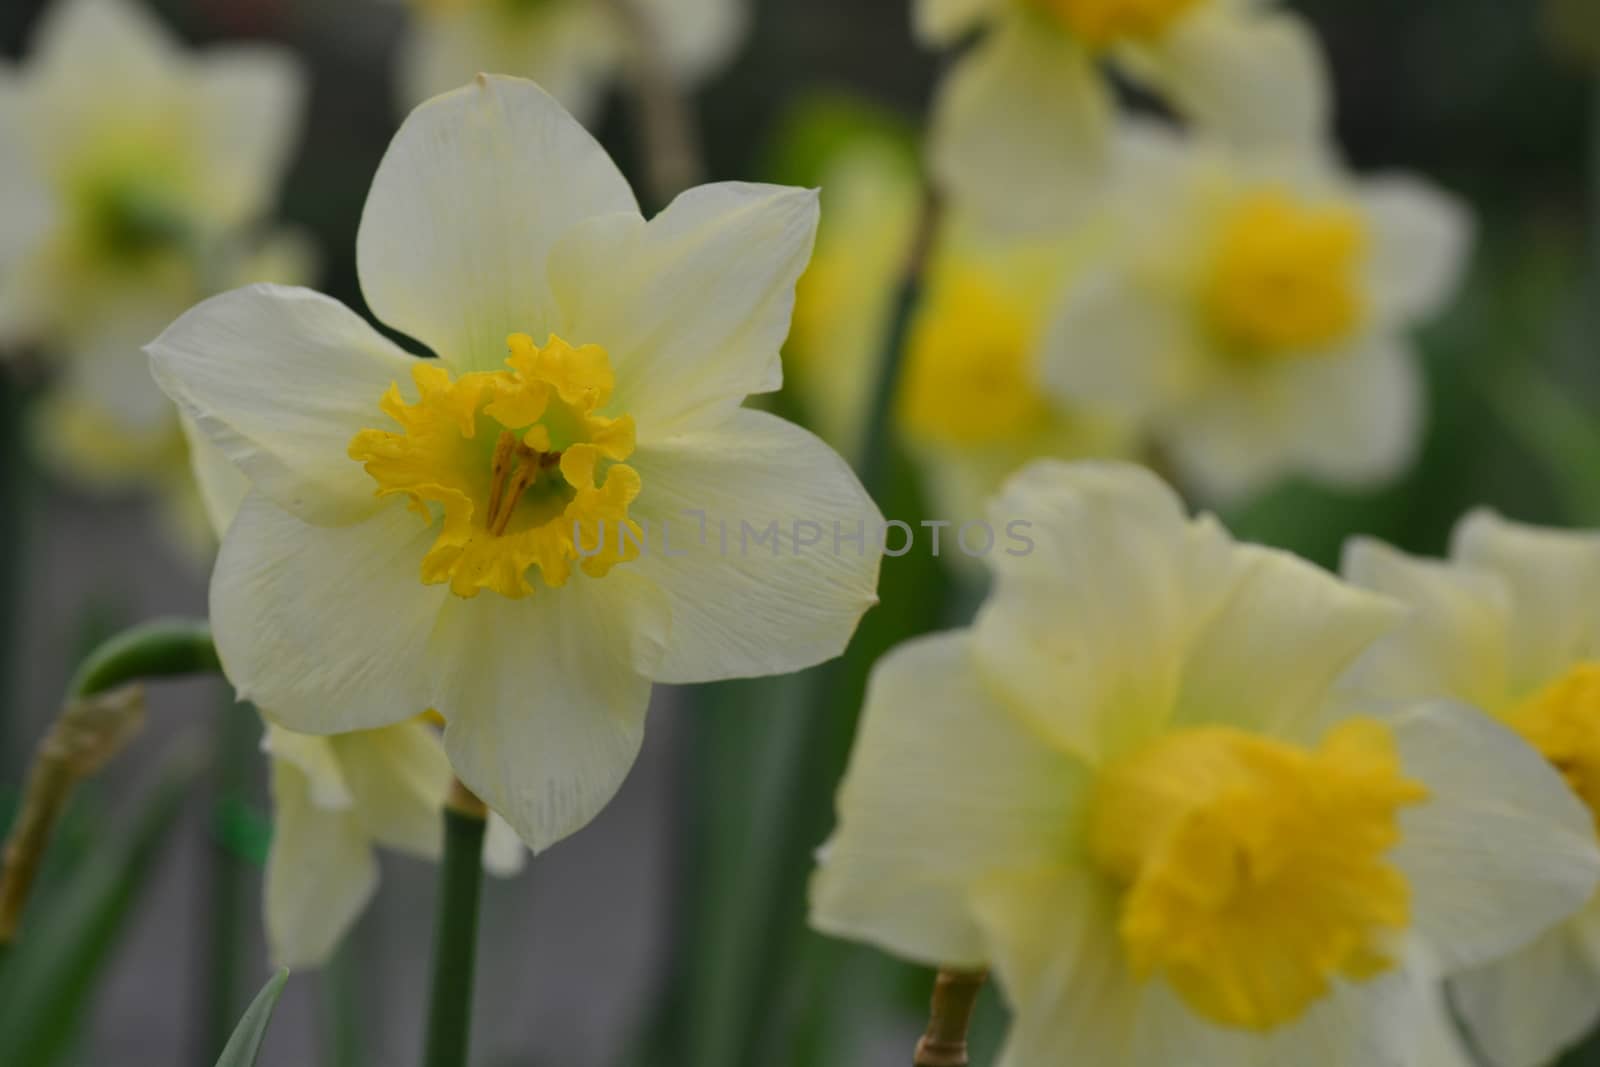 Daffodils, the flowers symbolizing friendship. by ideation90